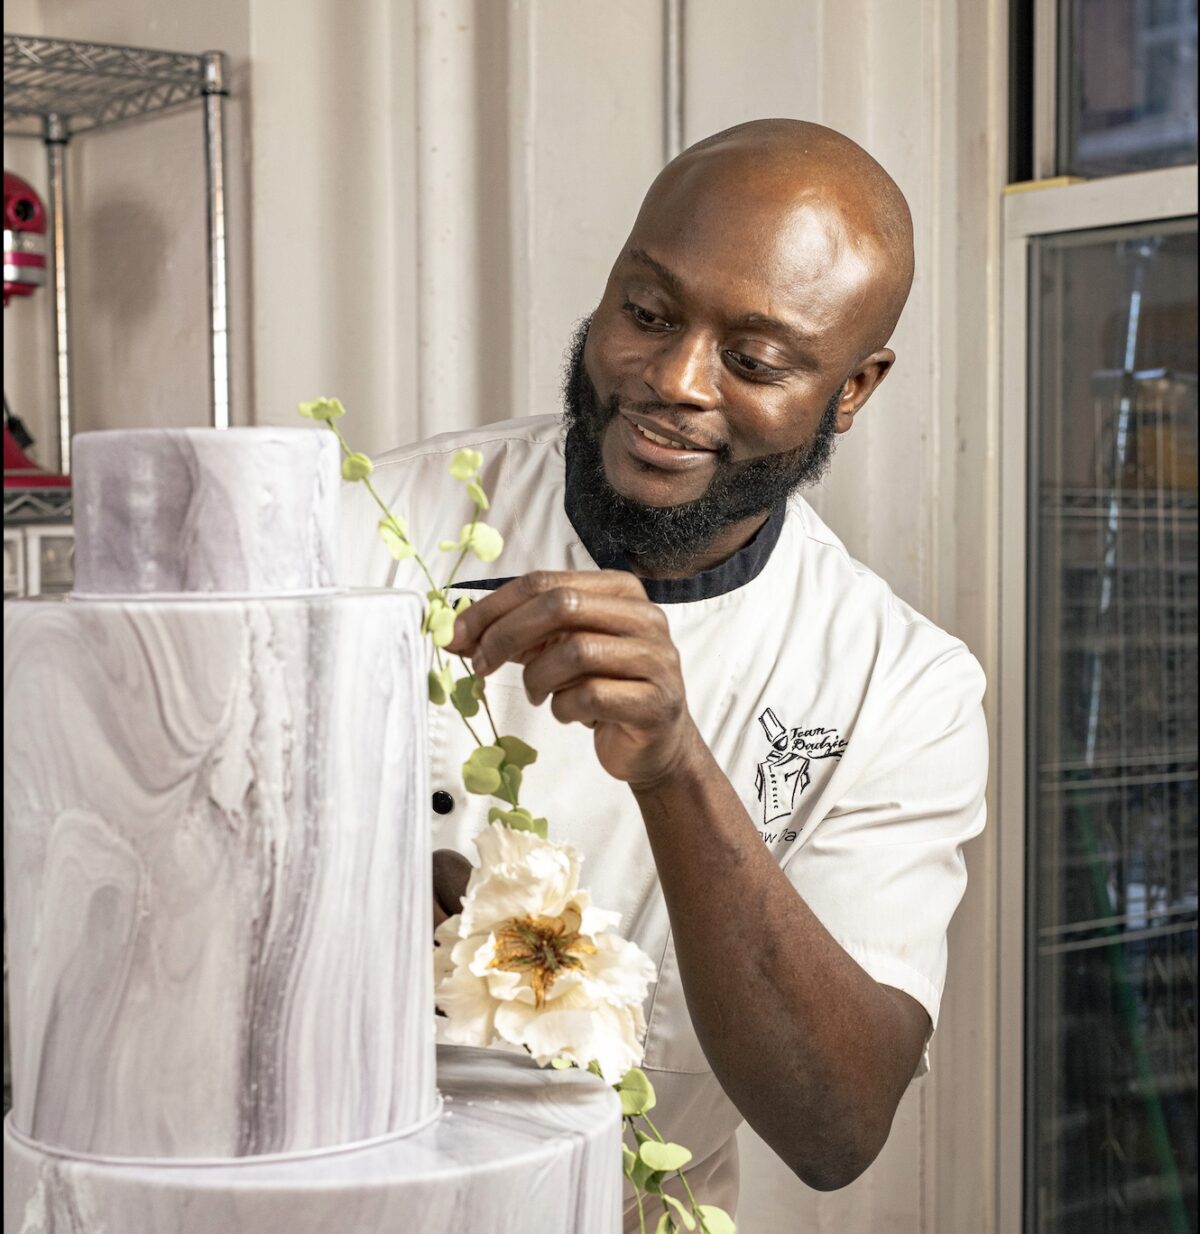 Pastry chef Ebow Dadzie decorates a cake with handmade sugar flowers at his Manhattan studio. (Tatsiana Moon for American Essence)